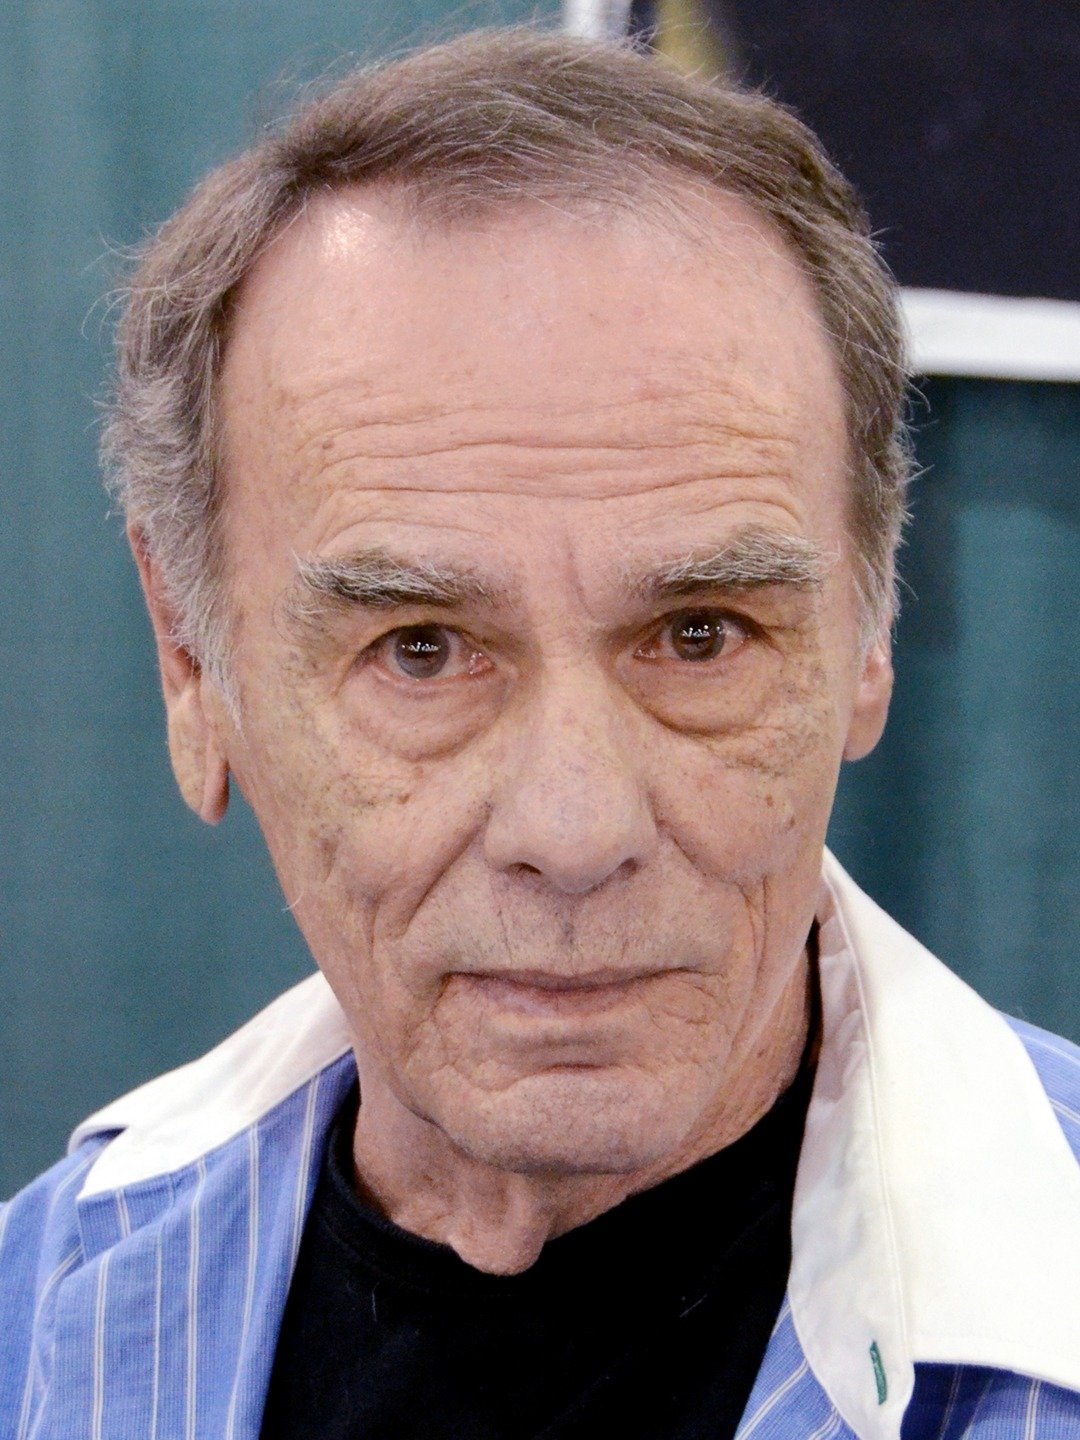 How tall is Dean Stockwell?